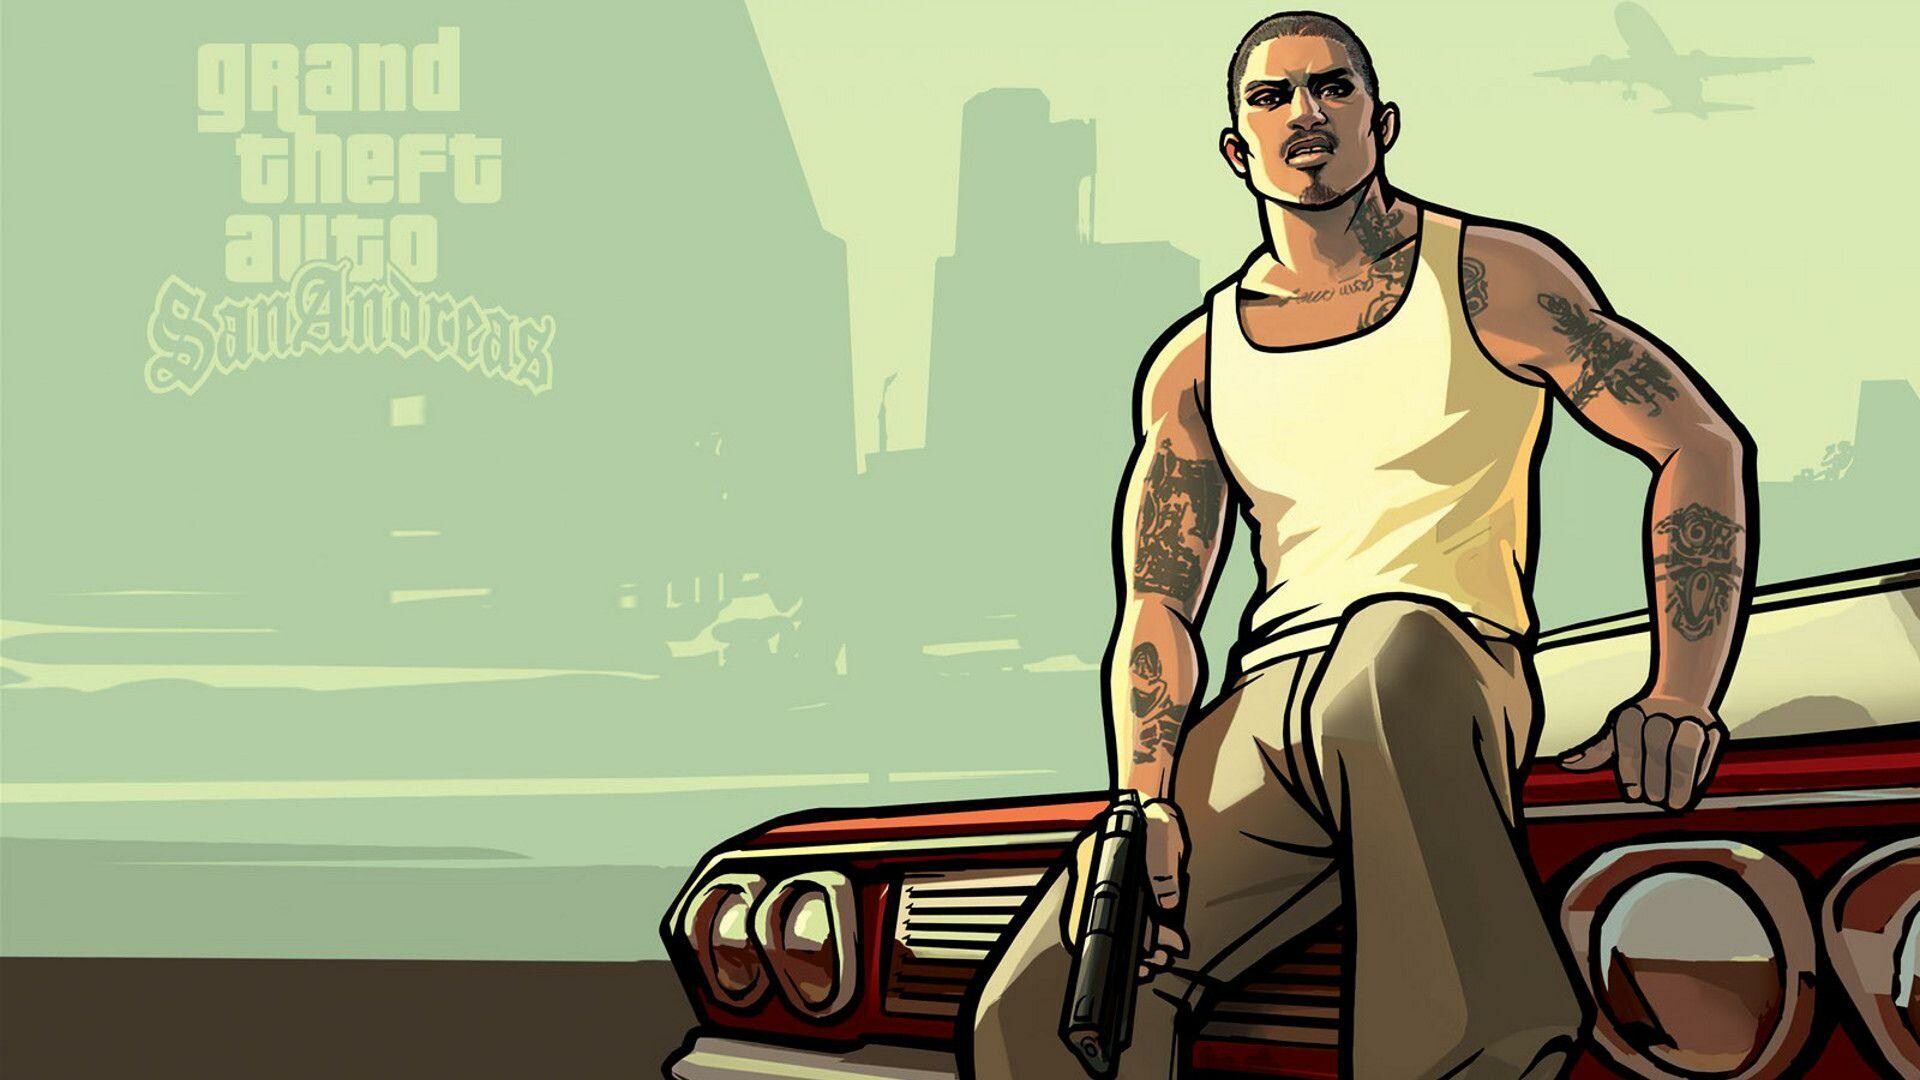 Grand Theft Auto: San Andreas: The protagonist, Carl Johnson, Returned home to mourn the death of his mother. 1920x1080 Full HD Background.